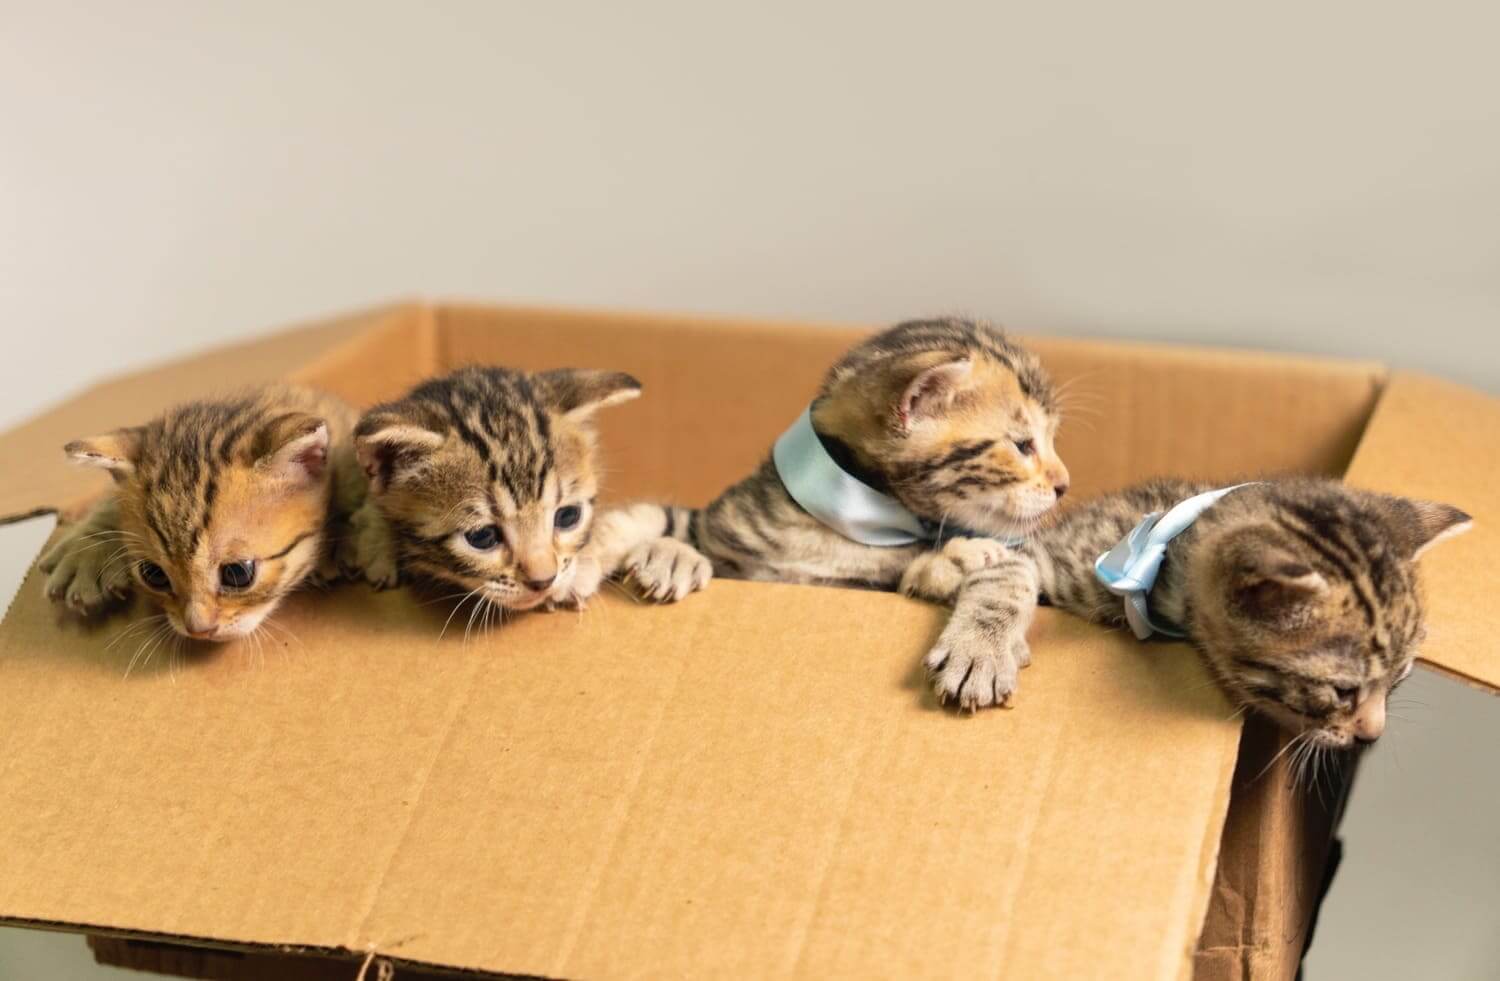 Bengal kittens in a box